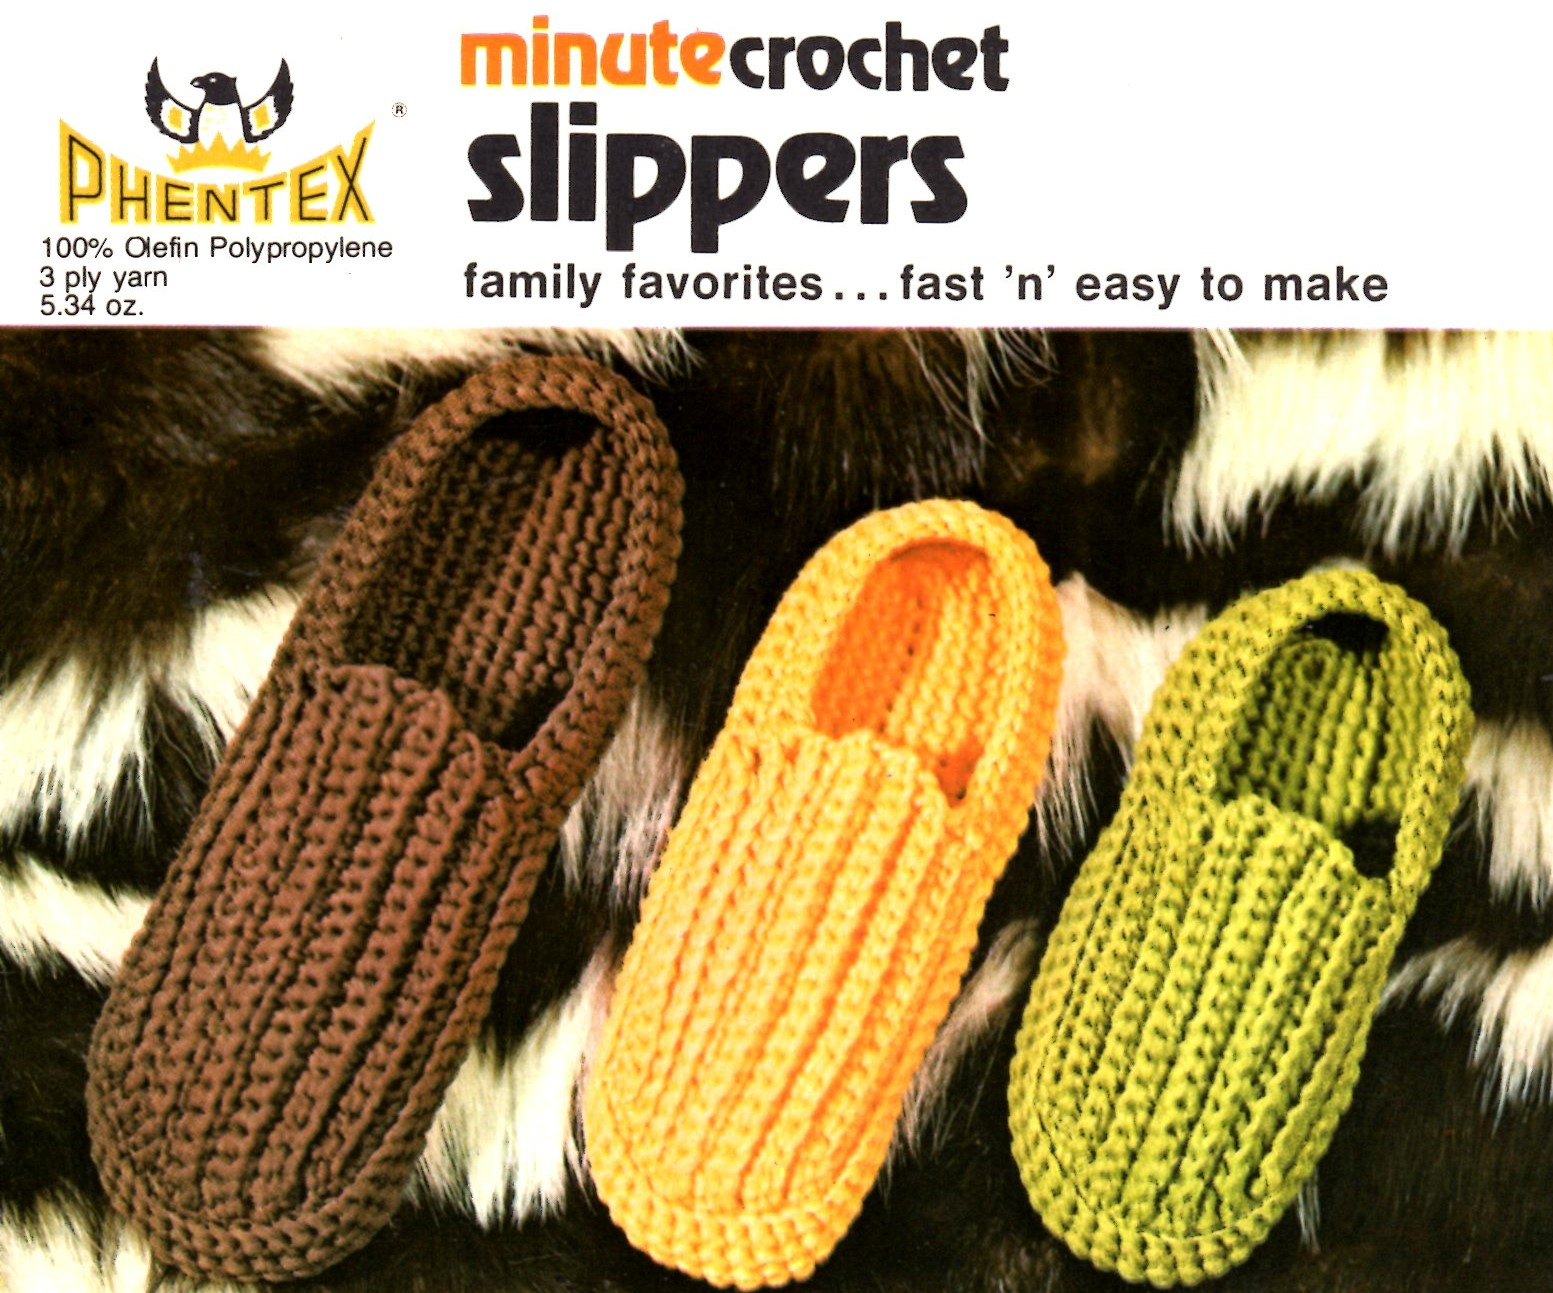 Crochet Sneakers Pattern Minute Crochet Slippers For The Whole Family Fast And Easy To Make